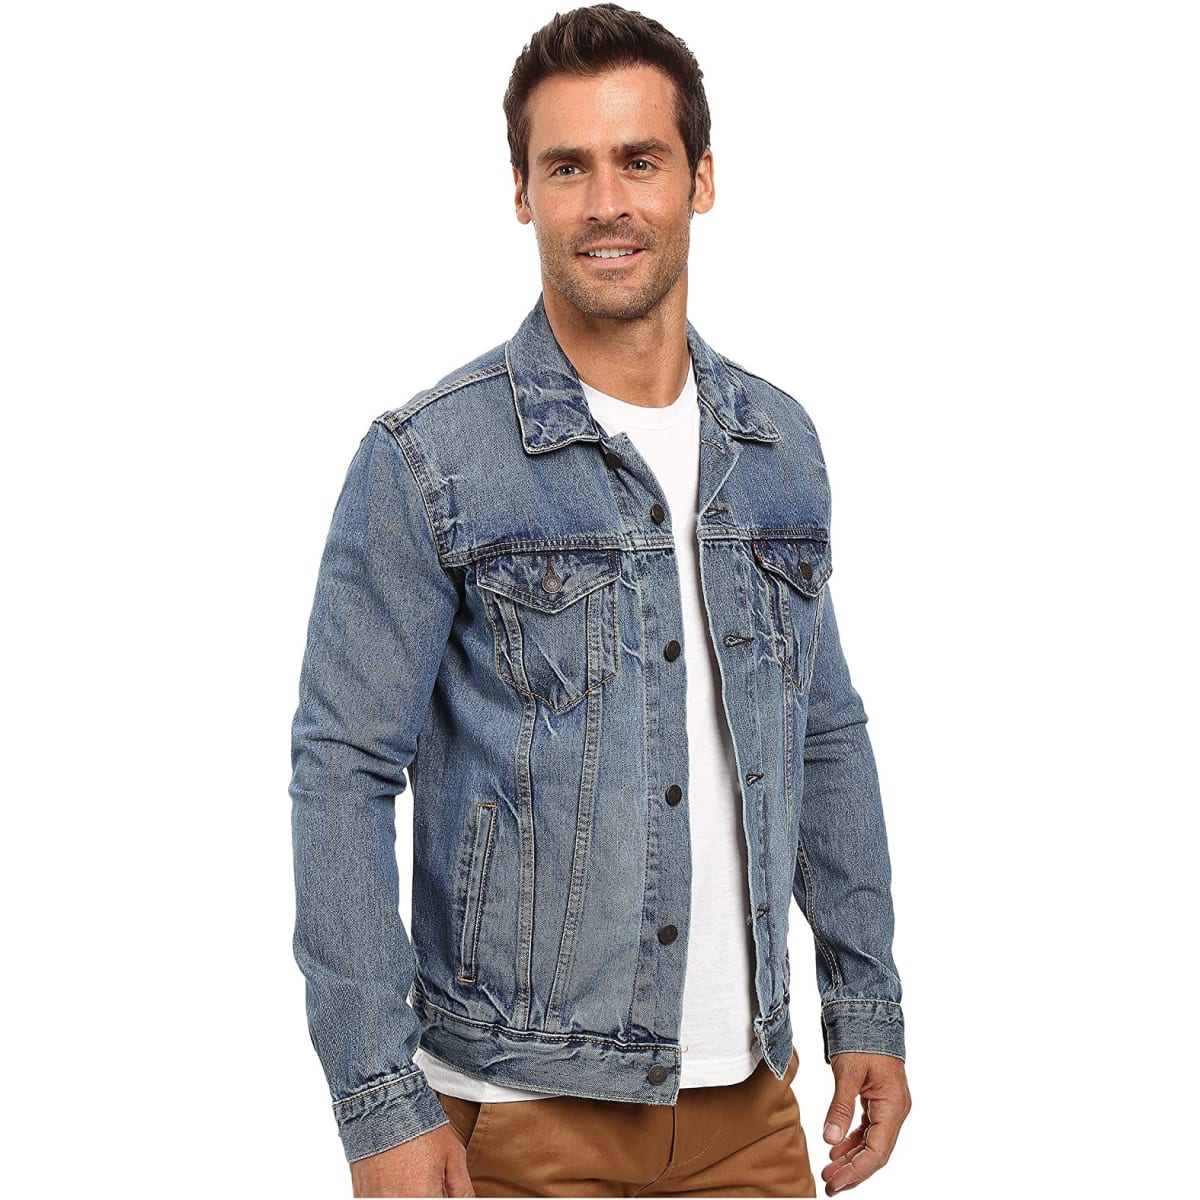 Stay Warm On Those Brisk Summer Nights With The Levi's Trucker Jacket -  Men's Journal